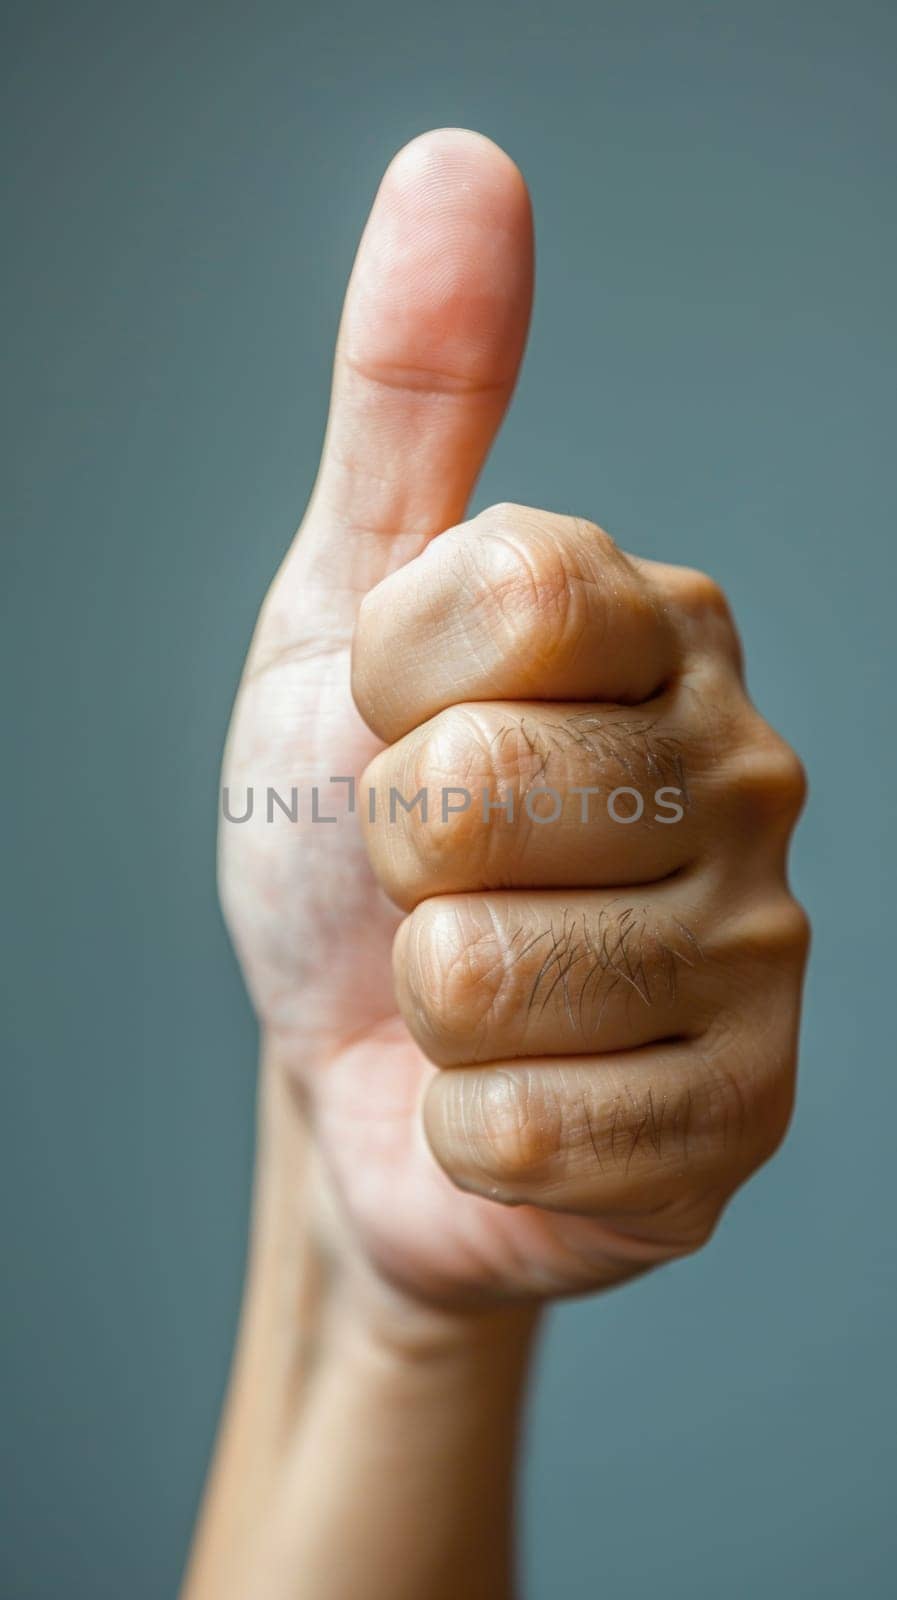 A close up of a man's hand giving the thumbs up